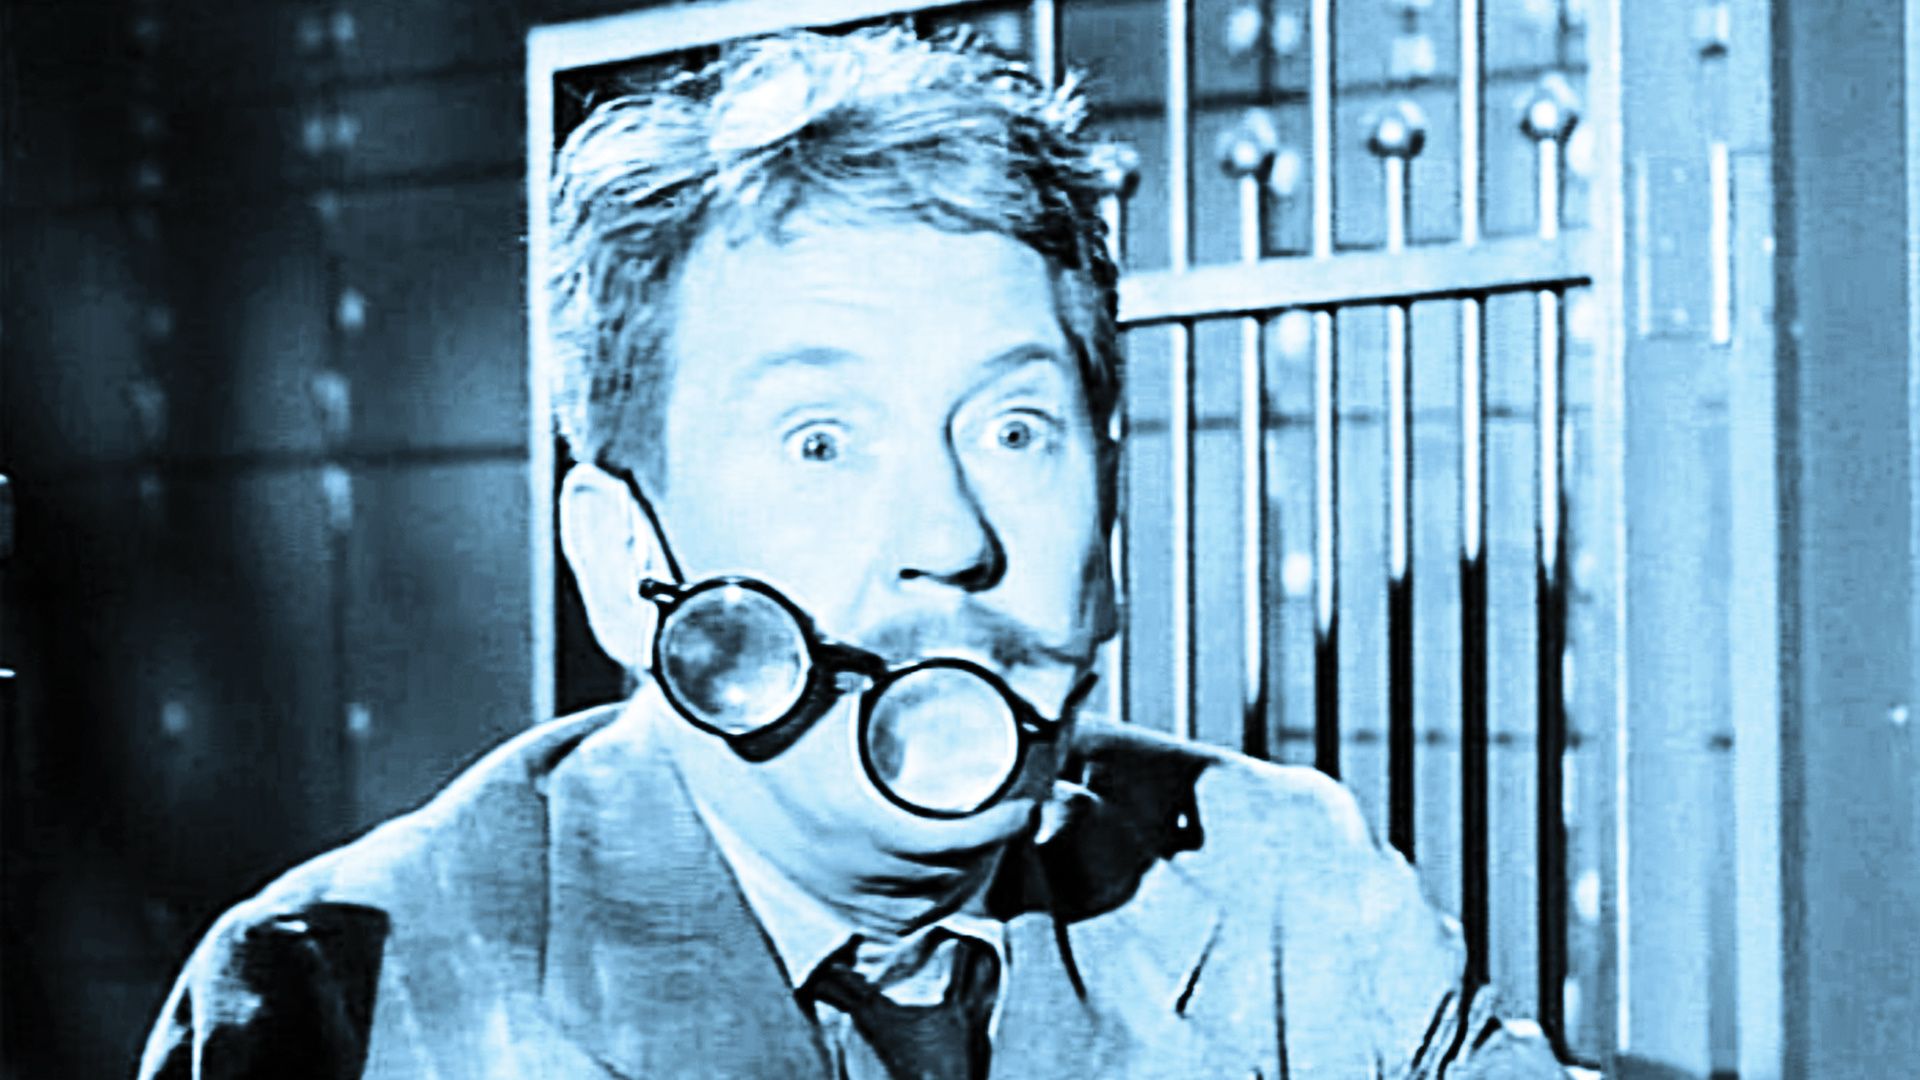 Actor Burgess Meredith with his glasses severely askew in a scene from a classic Twilight Zone.